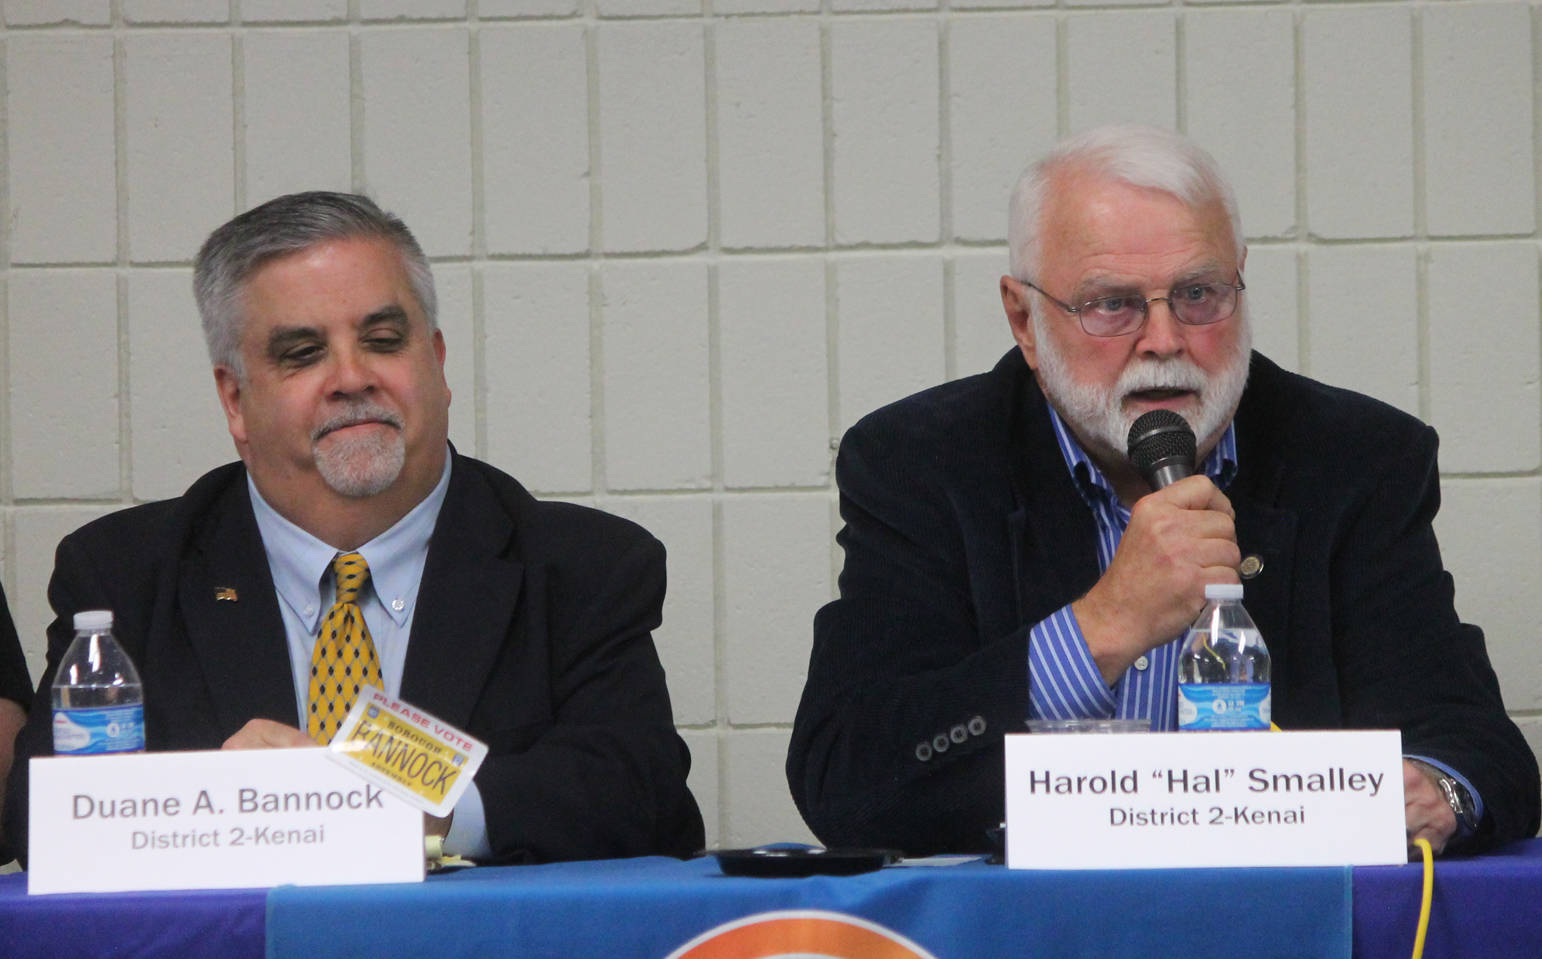 Duane Bannock, left, listens while Hal Smalley answers a question during a forum for Kenai Peninsula Borough Assembly candidates Wednesday at a joint meeting of the Kenai and Soldotna Chambers of Commerce. Bannock and Smalley are running for the District 2-Kenai seat. (Photo by Will Morrow/Peninsula Clarion)